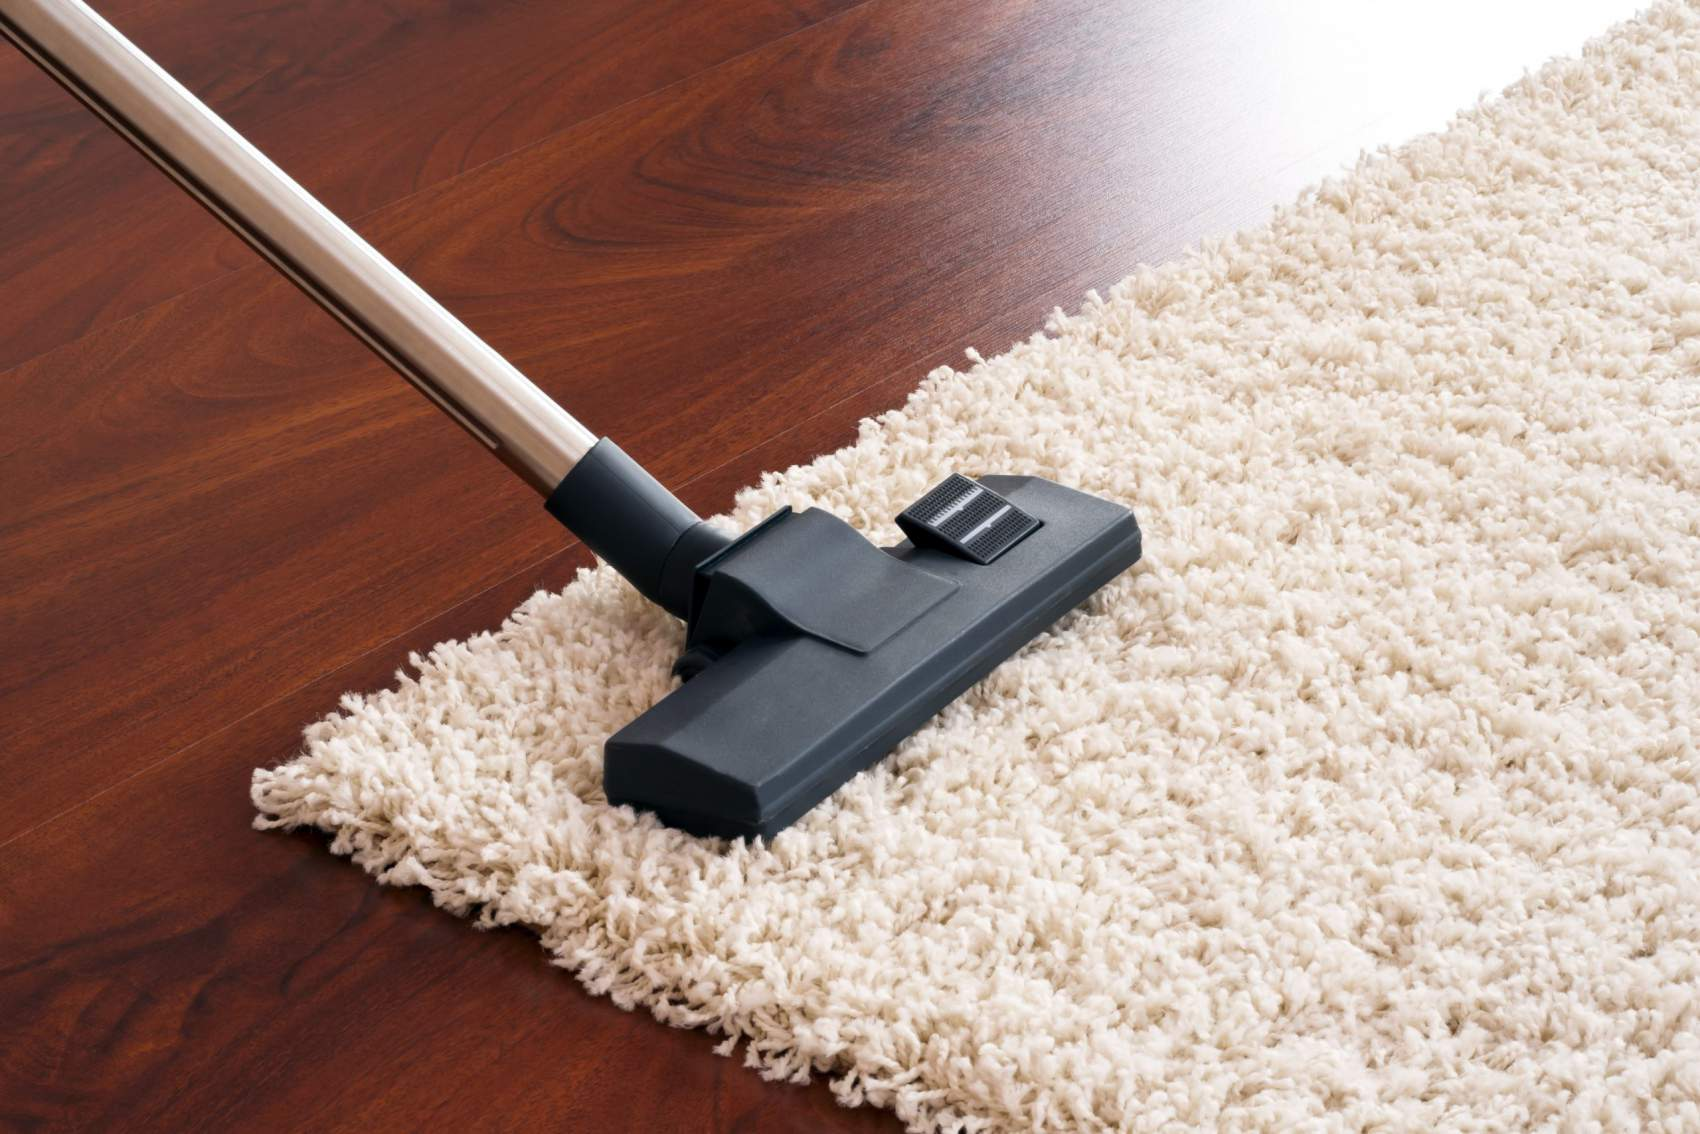 When deep cleaning natural fiber rugs, you should vacuum all sides of the carpet fibers